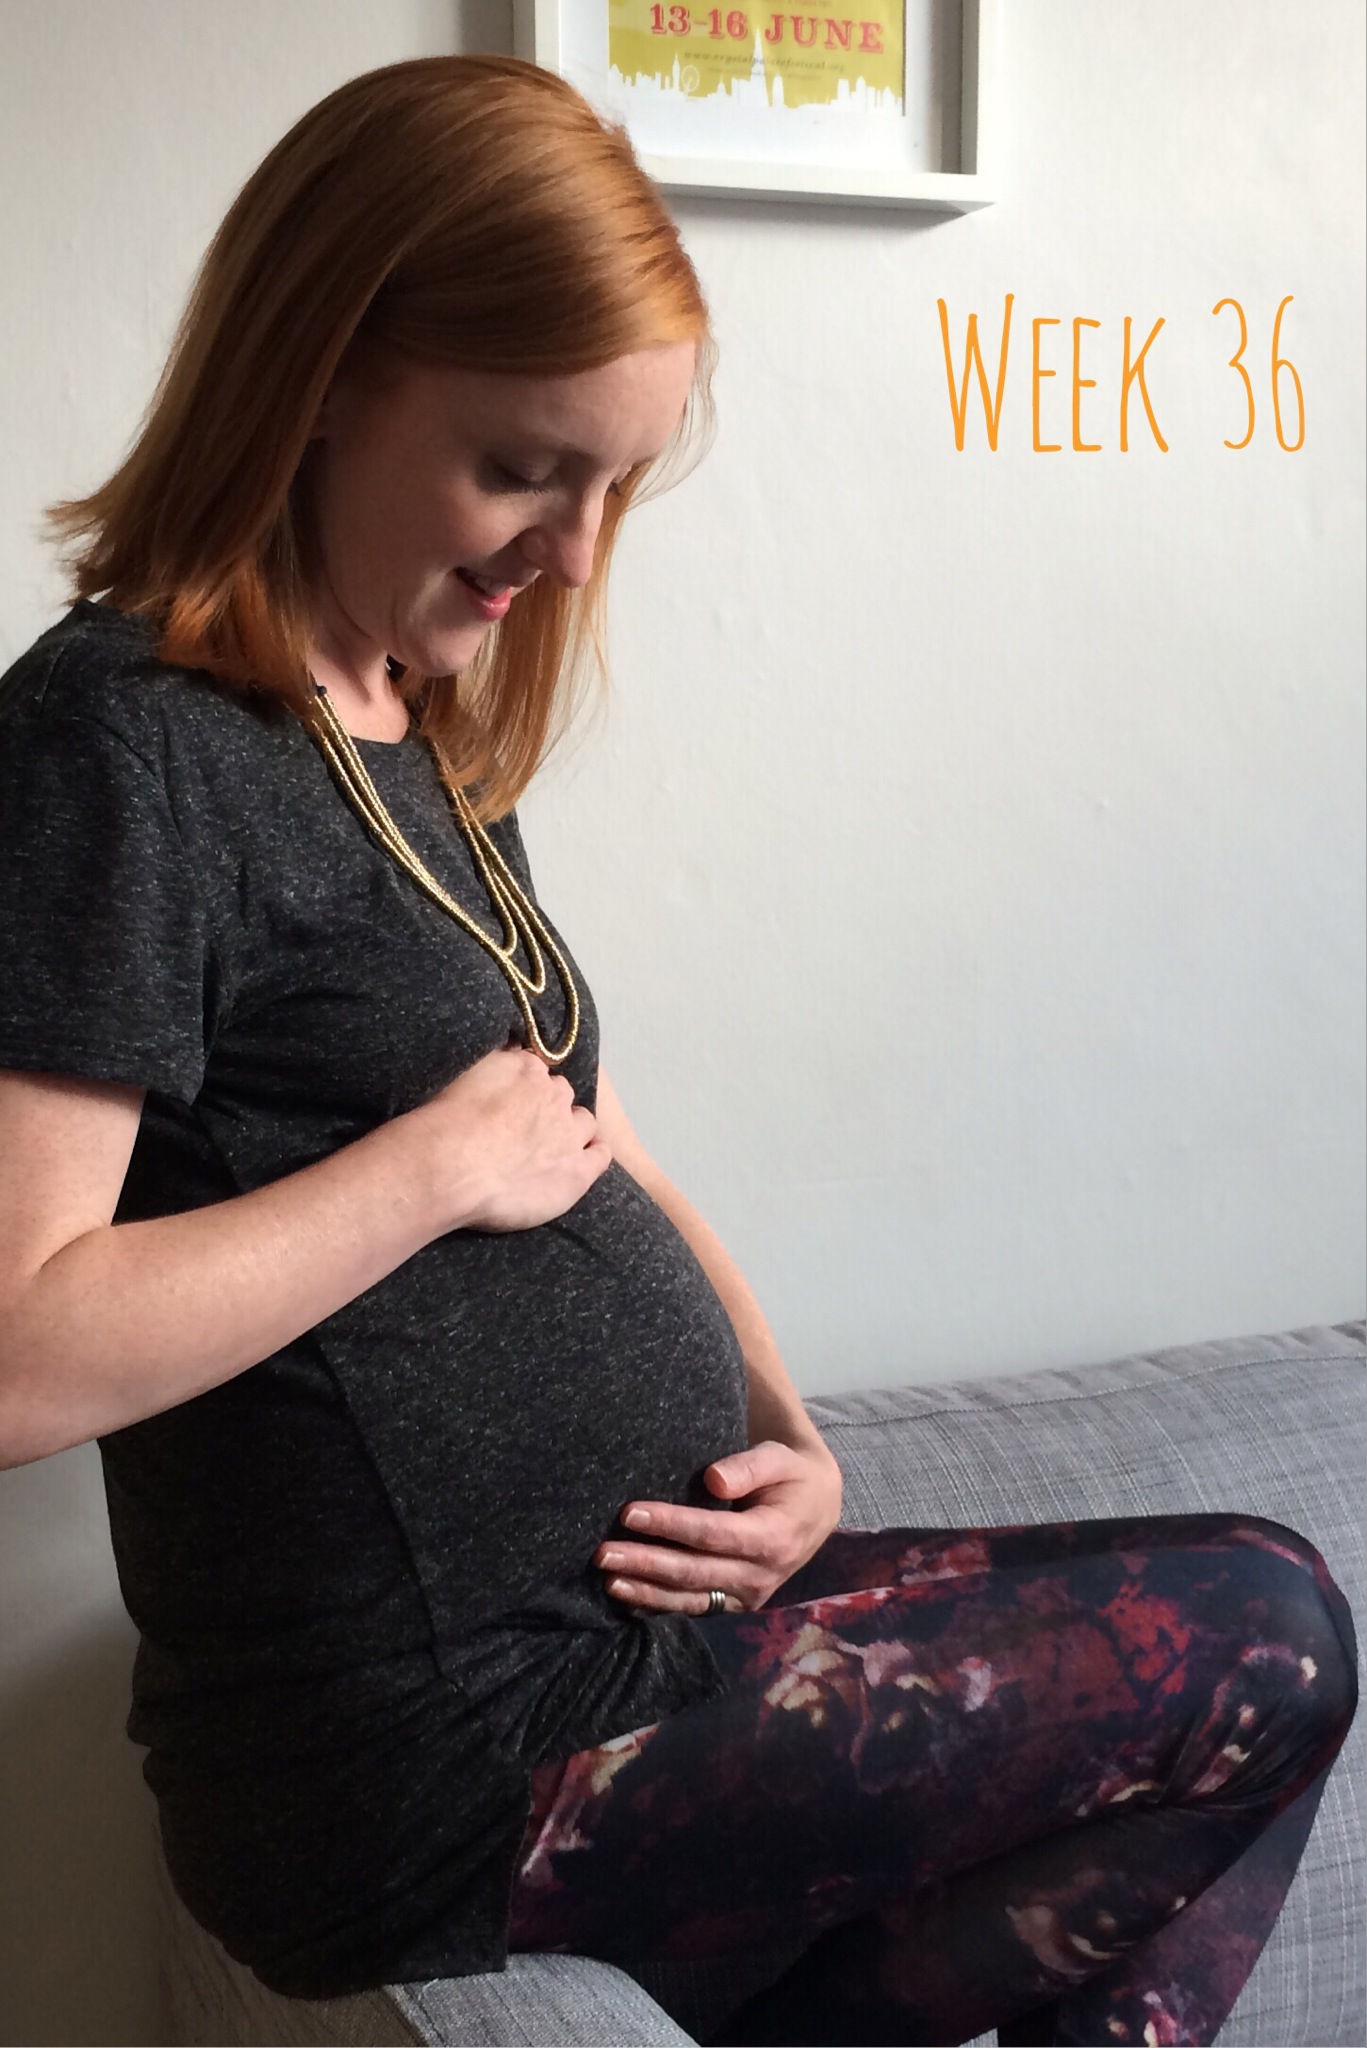 36 weeks pregnant - pregnancy update and bump shot